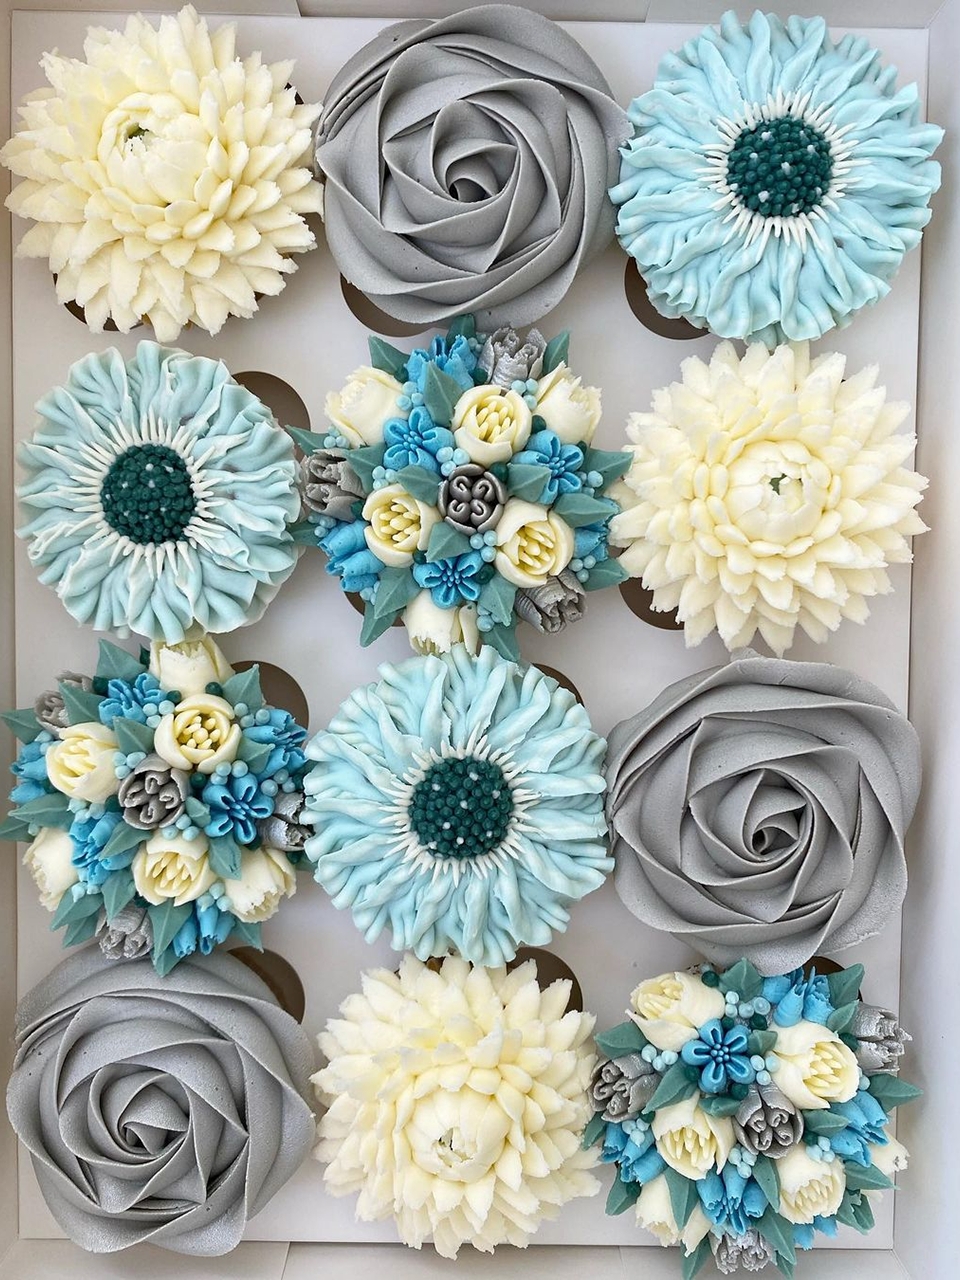 Beautiful buttercream flower topping on cupcakes by Kerry's Bouqcakes